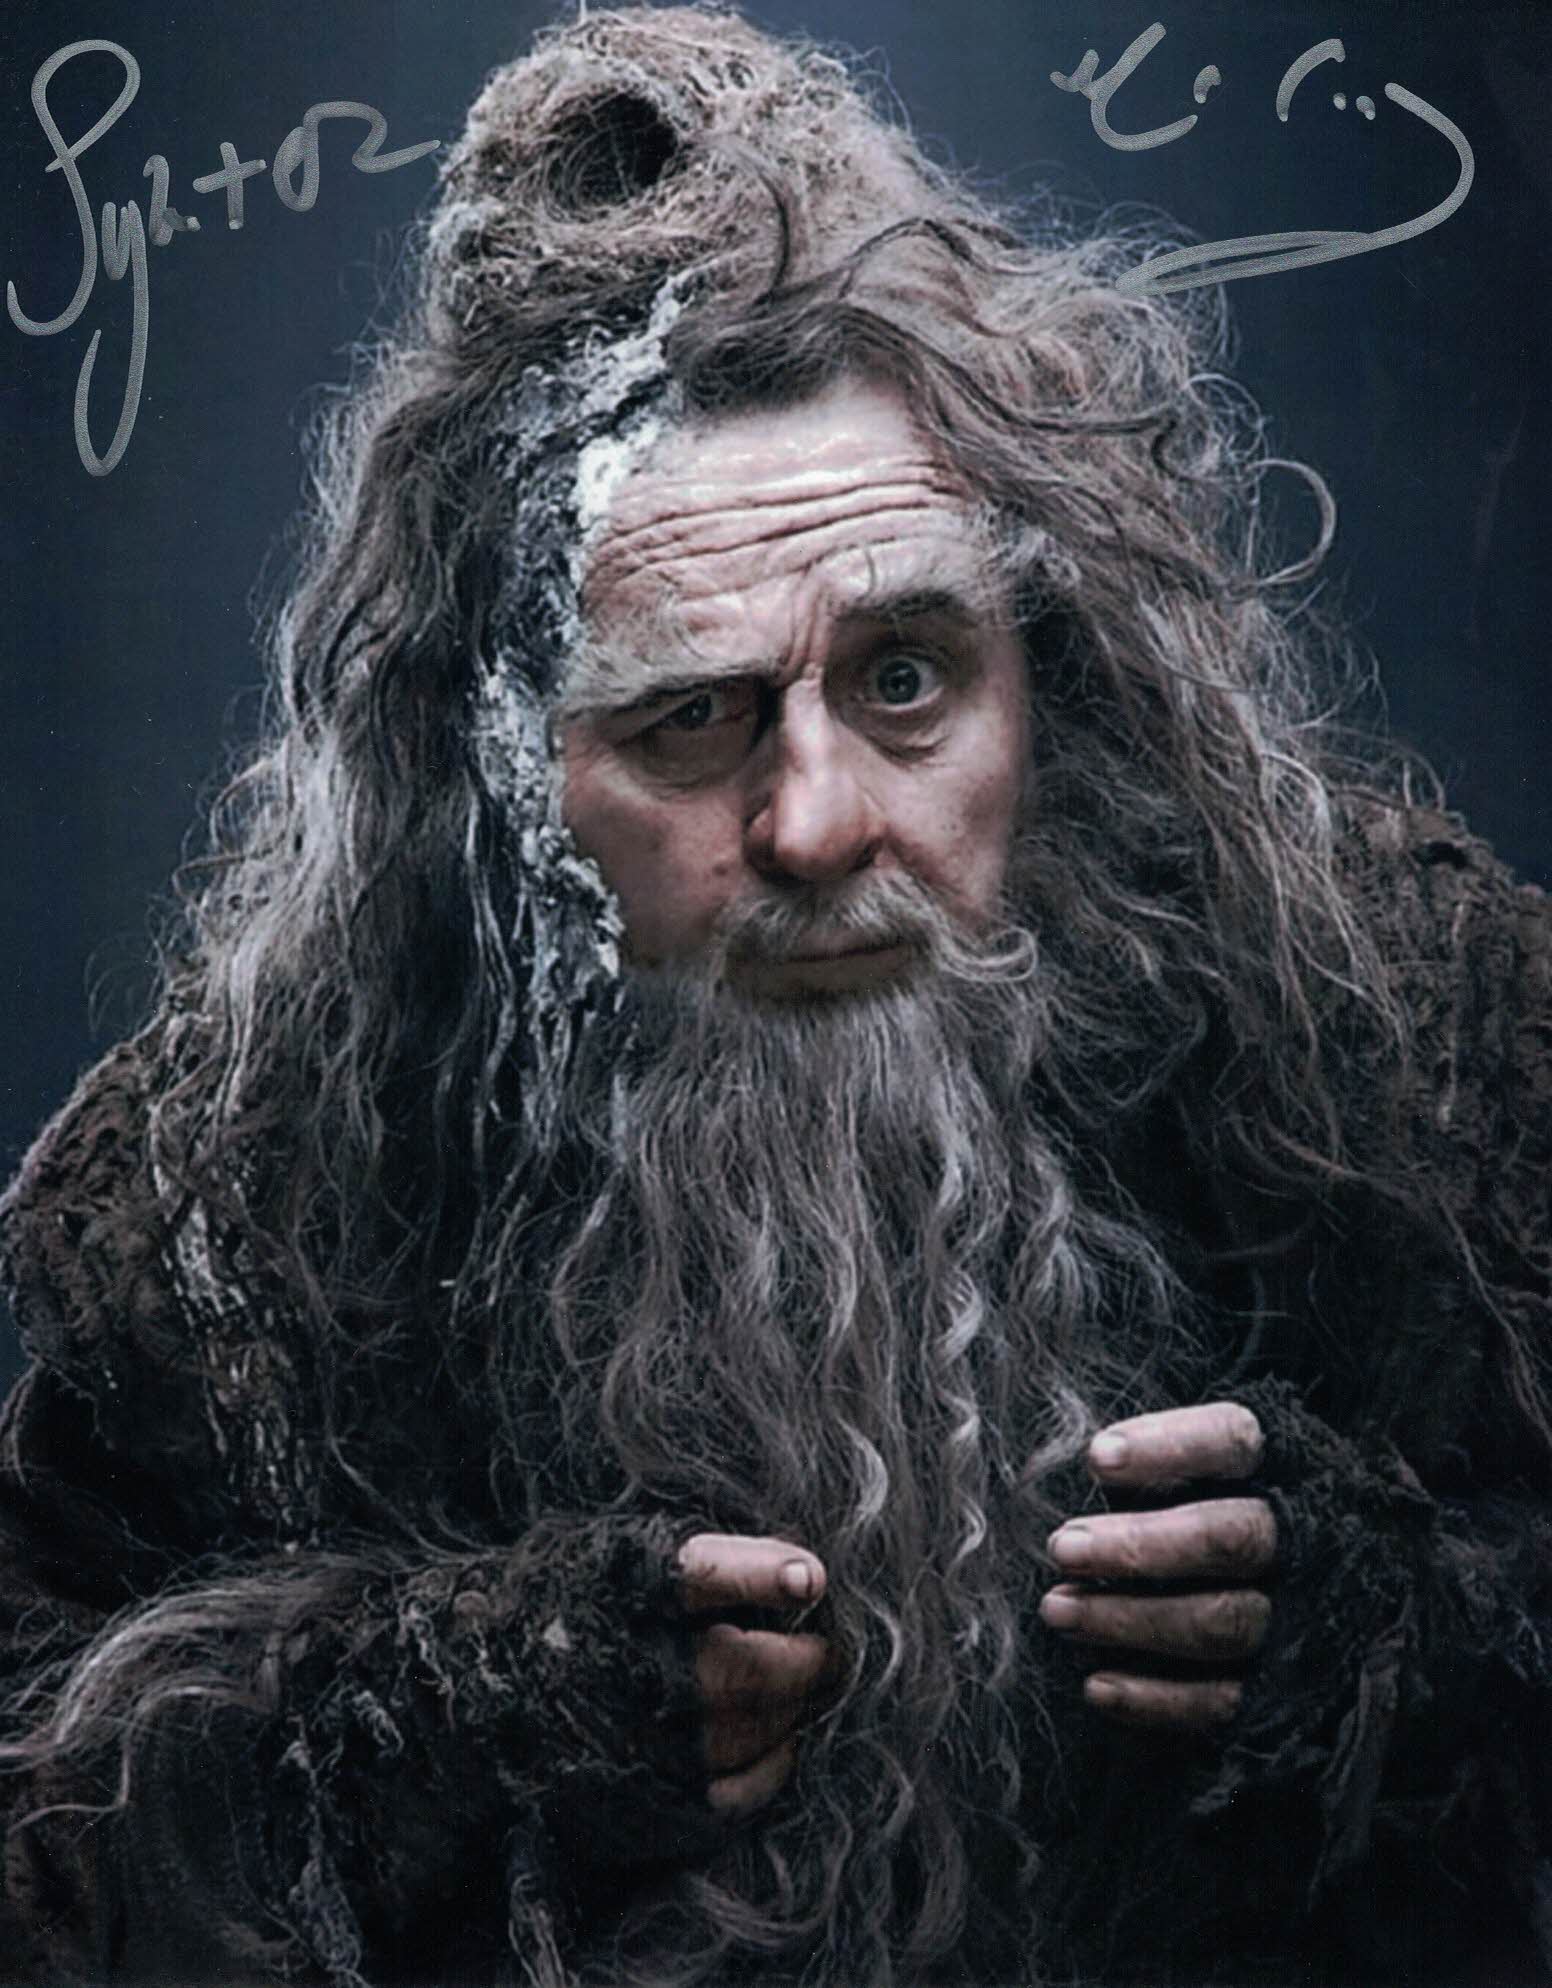 SYLVESTER MCCOY - Radaghast in The Hobbit- hand signed 10 x 8 photo